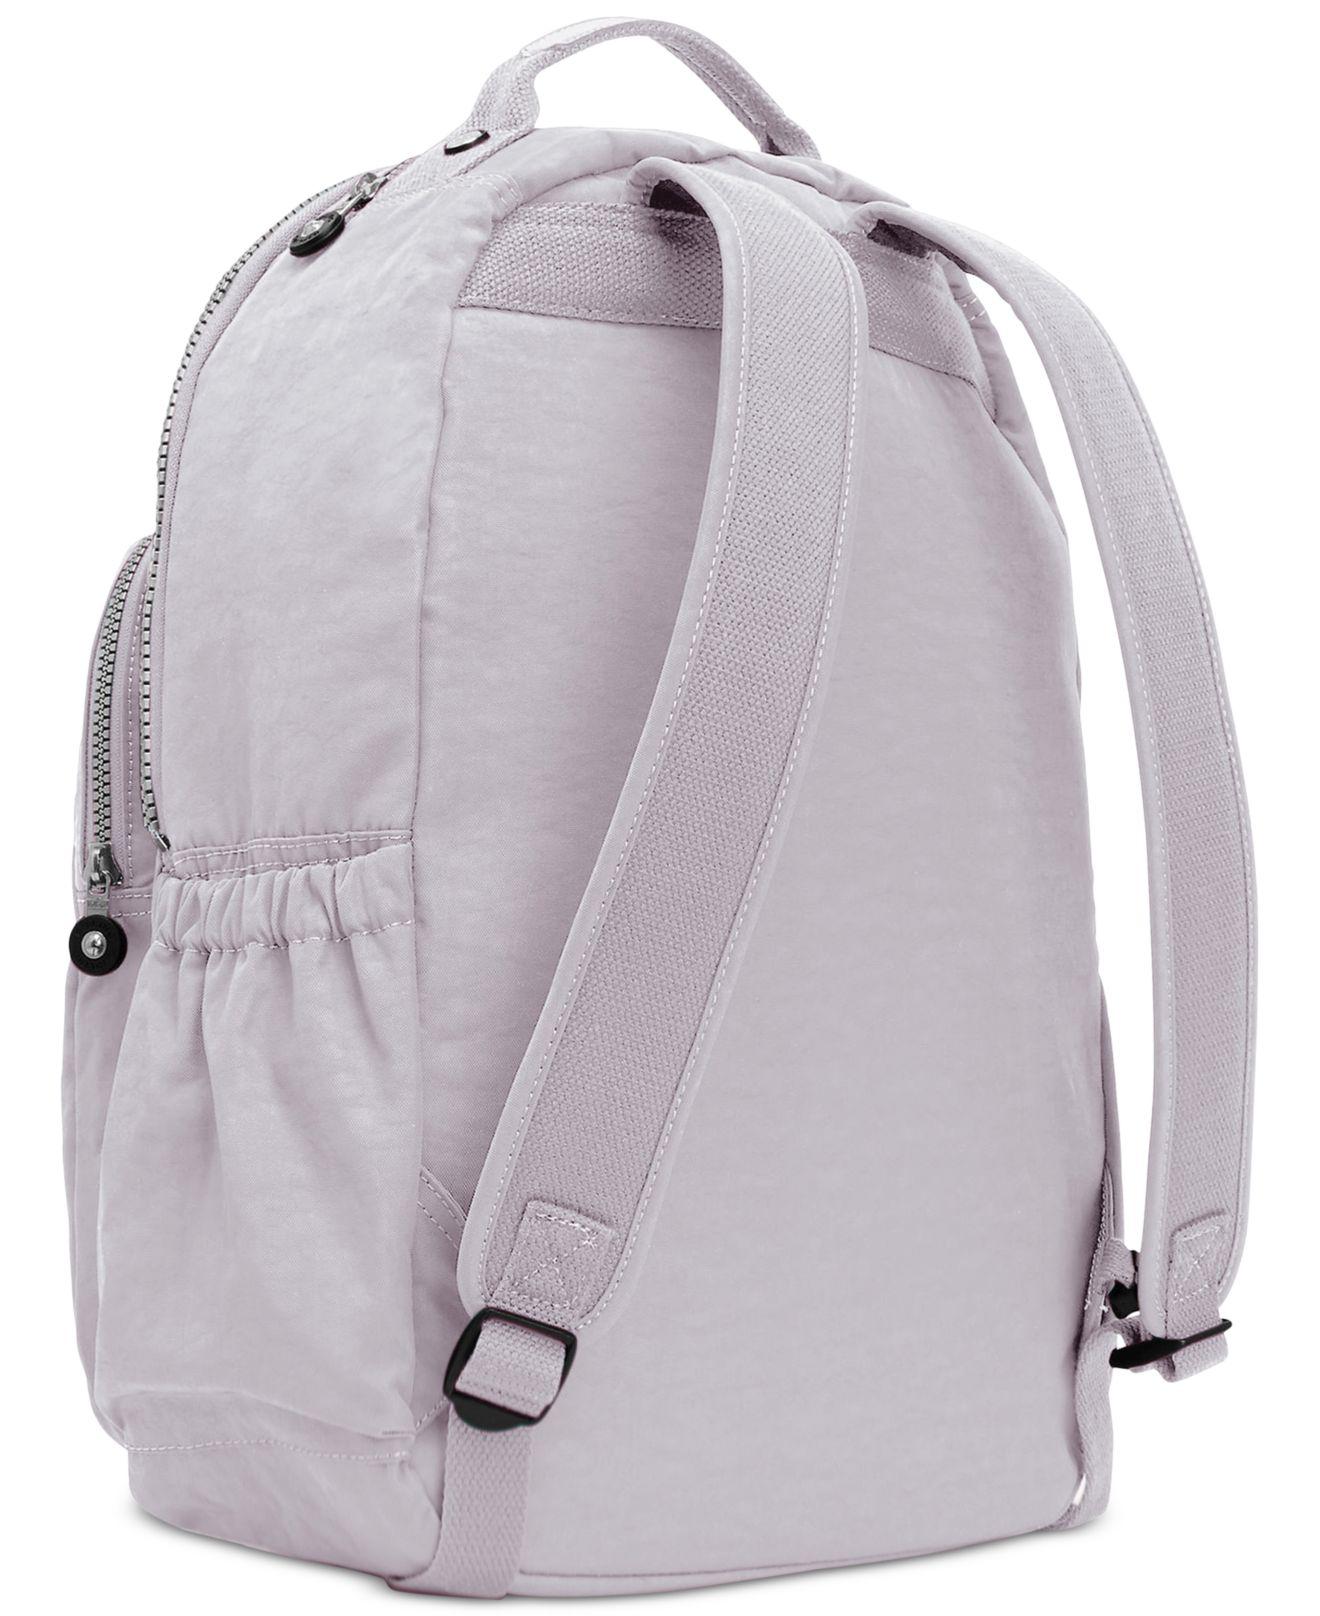 Kipling Synthetic Seoul Go Large Backpack in Slate Grey/Silver (Gray) | Lyst